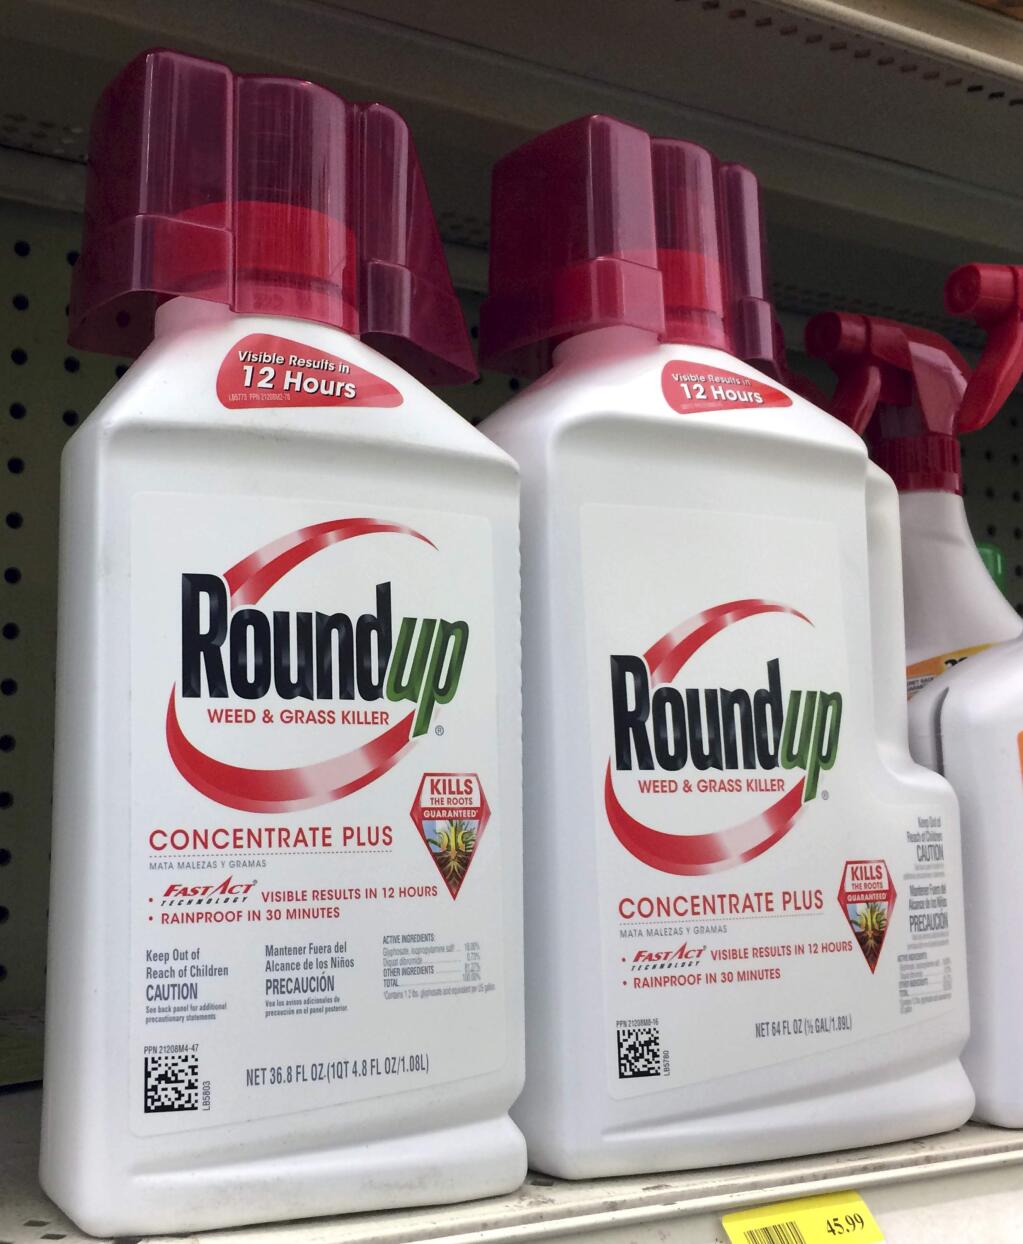 Containers of Roundup a weed killer is seen on a shelf at a hardware store in Los Angeles on Thursday, Jan. 26, 2017. A battle over the main ingredient in Roundup, the popular weed killer sprayed by farmers and home gardeners worldwide, is coming to a head in California, where officials want to be the first to label the chemical, glyphosate, with warnings that it could cause cancer. Chemical giant Monsanto has sued the nation's leading agricultural producer, saying state officials illegally based their decision for warning labels on an international health organization. (AP Photo/Reed Saxon)